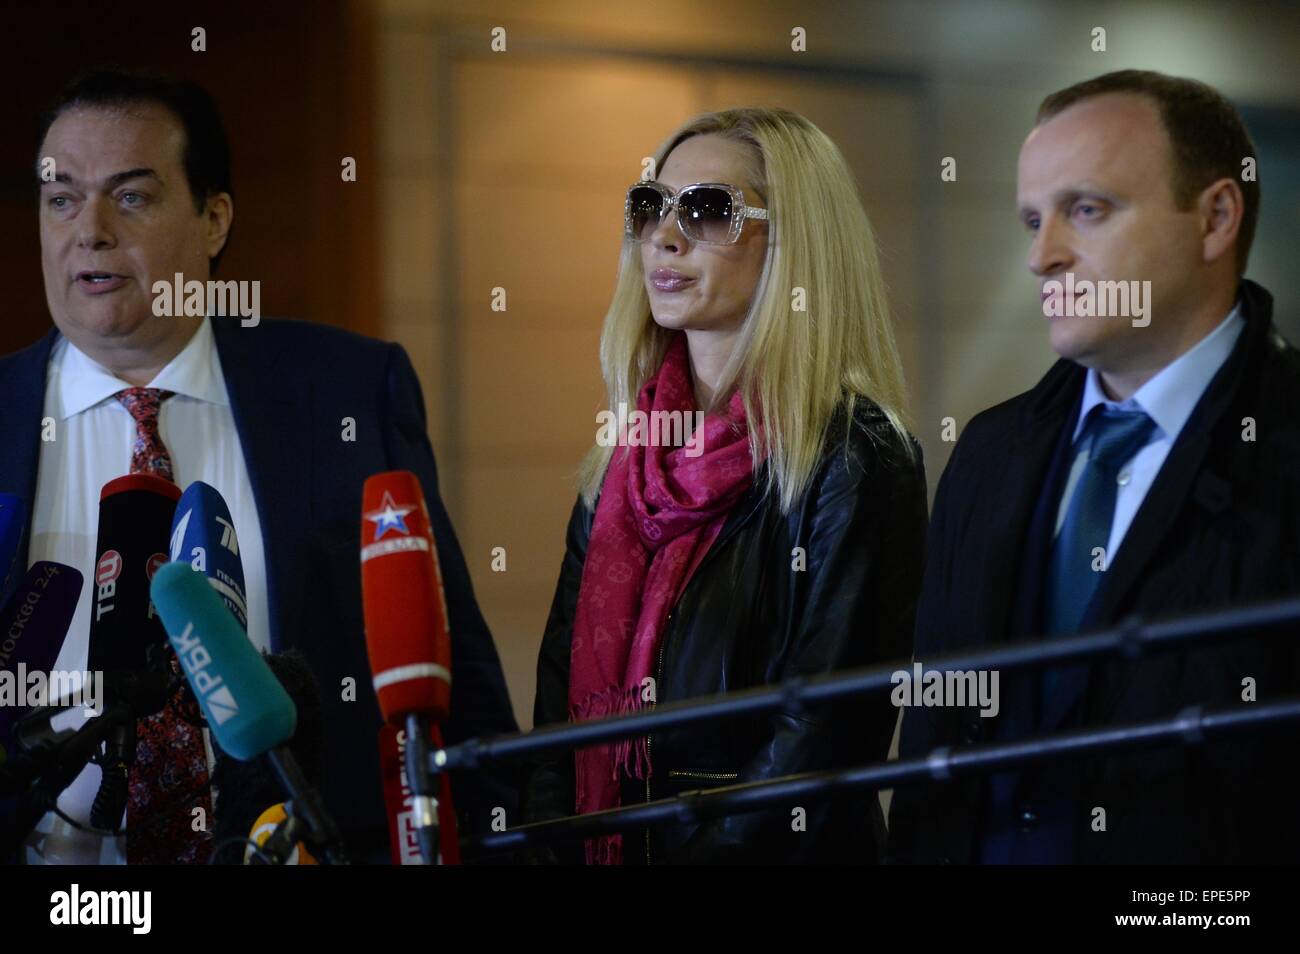 Moscow, Russia. 17th May, 2015. Sergei Polonsky's lawyer Sergei Vladi (L) and Polonsky's wife Olga Deripaska (C) talk with media in Domodedovo international airport, 42 kilometres from Moscow, Russia, May 17, 2015. Cambodia deported Russian ex-billionaire Sergei Polonsky on Sunday for his violation of the country's immigration law. Polonsky, who is wanted in his homeland for embezzlement, was arrested by the Cambodian authorities on Friday on an island off the southwestern city of Preah Sihanouk province. © Pavel Bednyakov/Xinhua/Alamy Live News Stock Photo